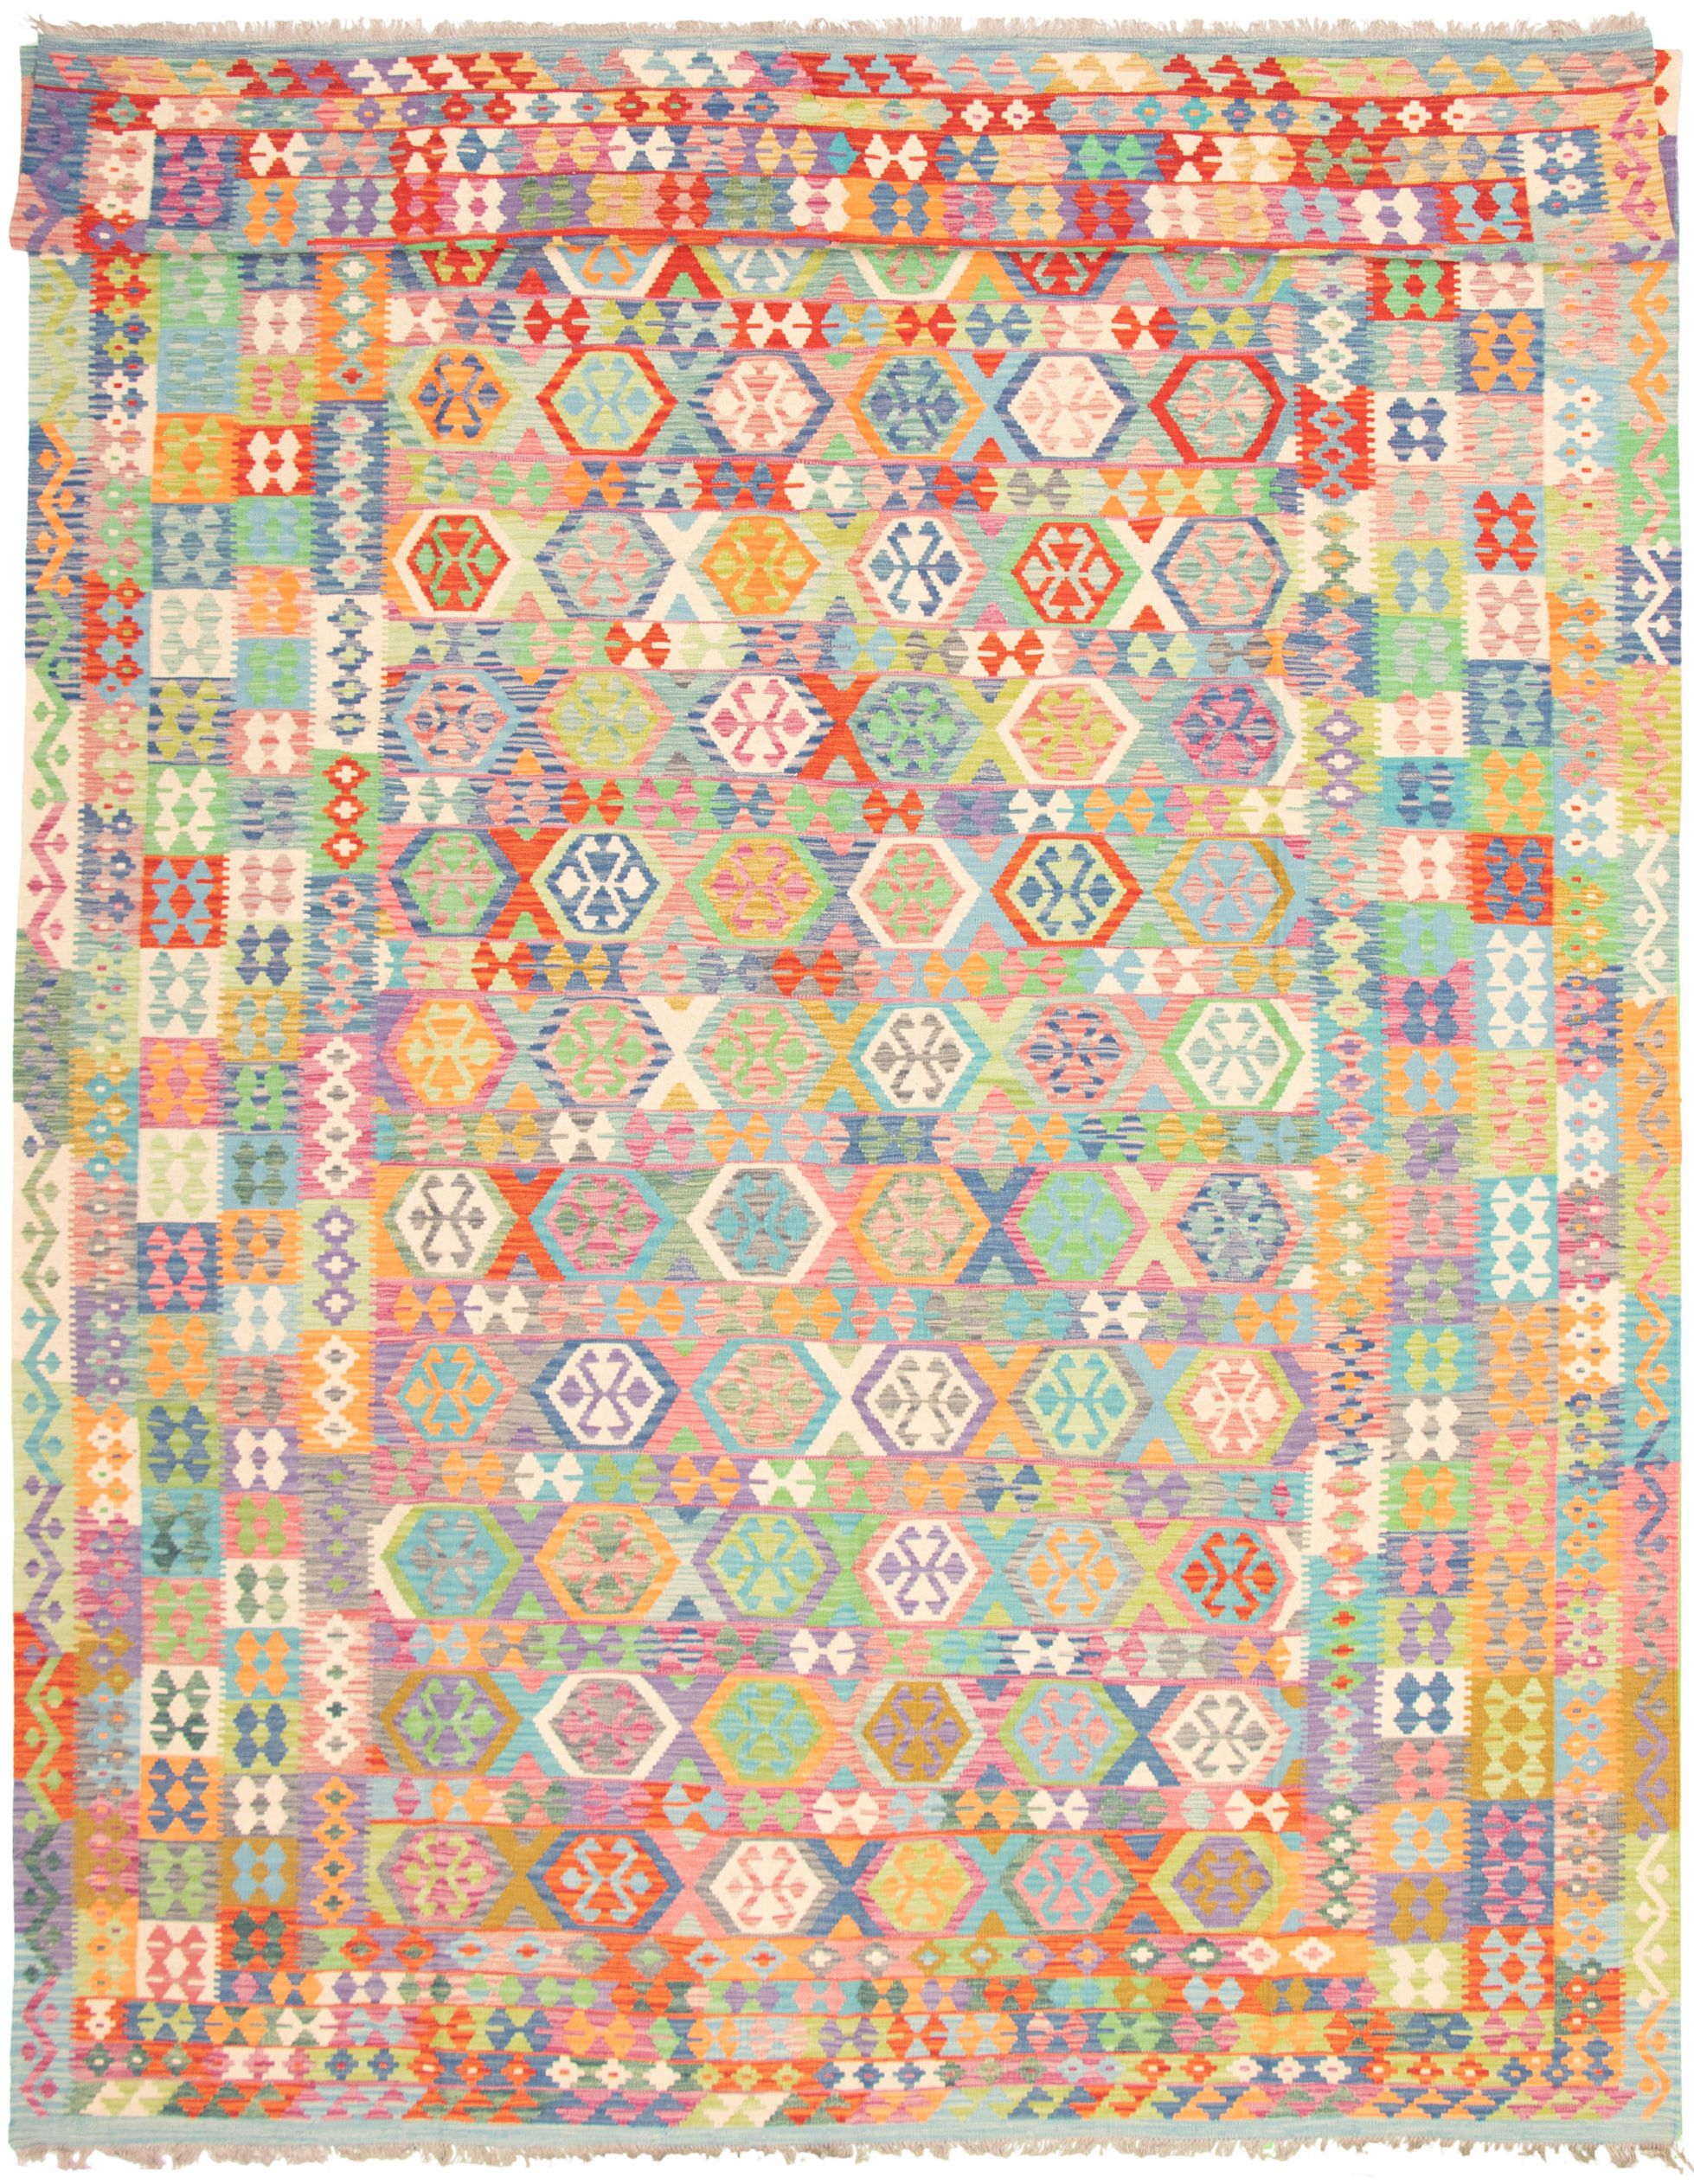 Hand woven Bold and Colorful  Turquoise Wool Kilim 10'4" x 16'2" Size: 10'4" x 16'2"  